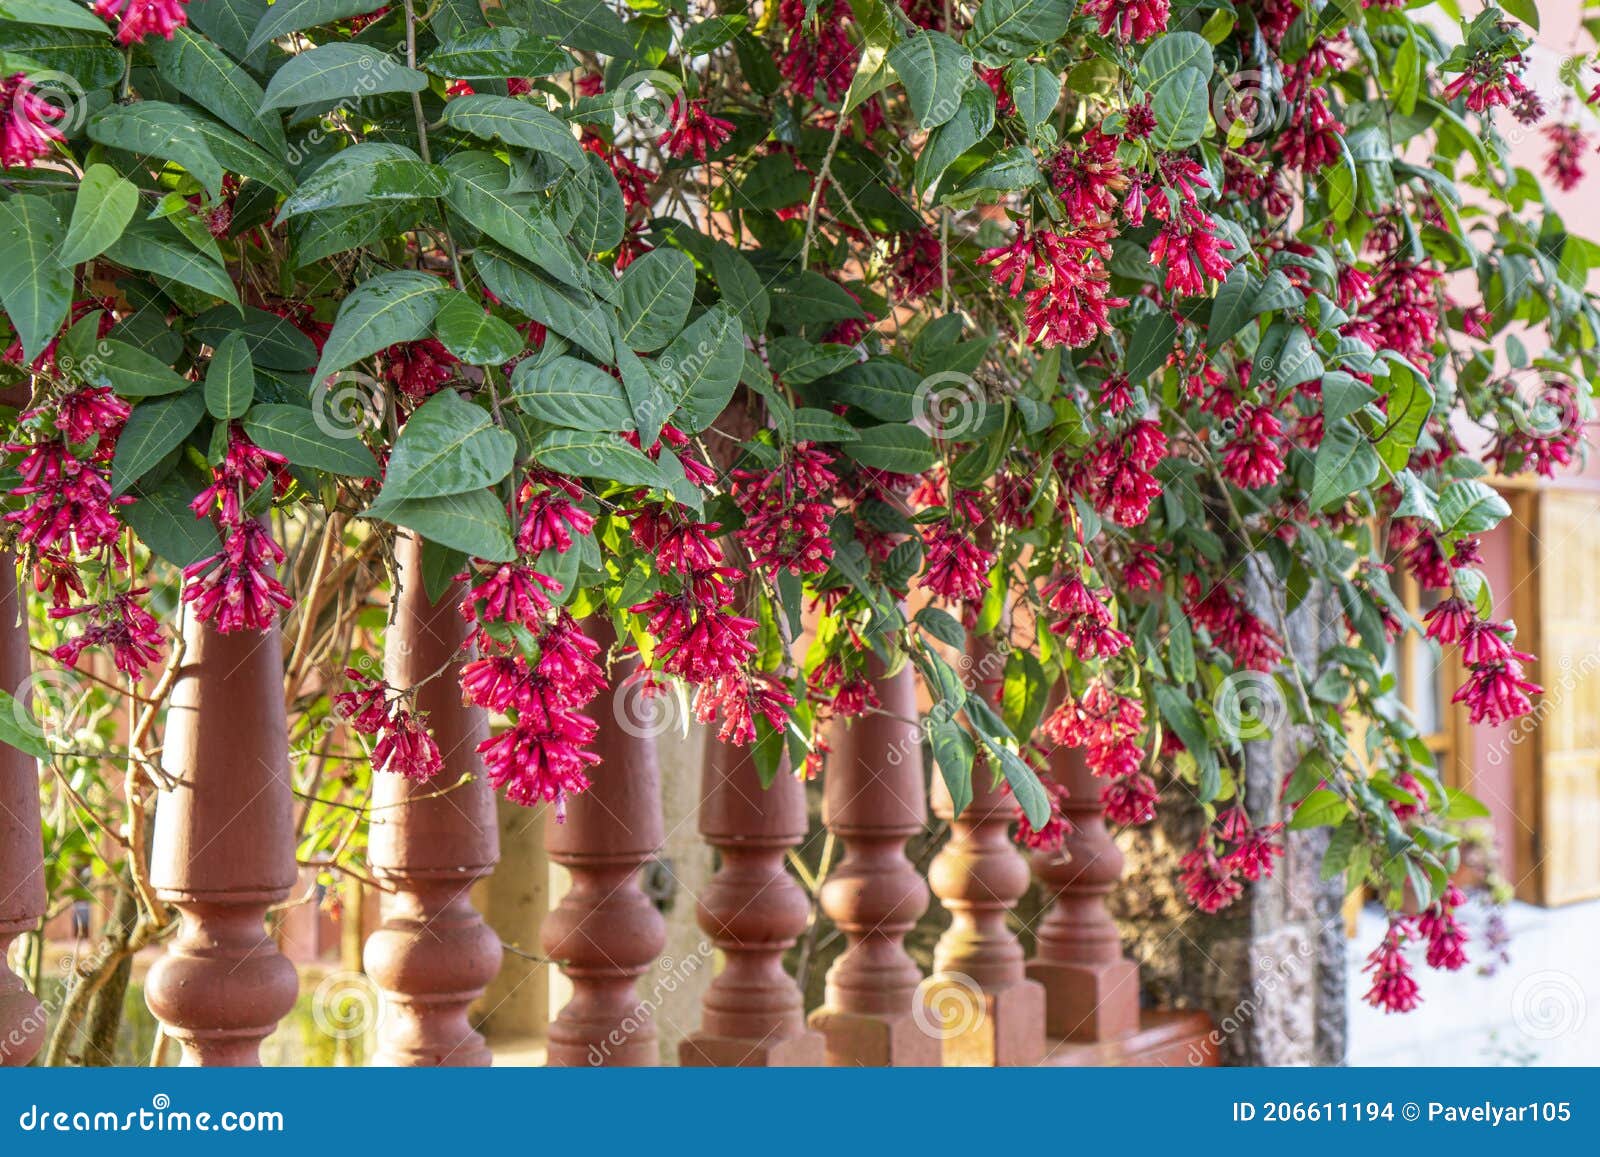 fuchsia or onagraceae and wooden fence